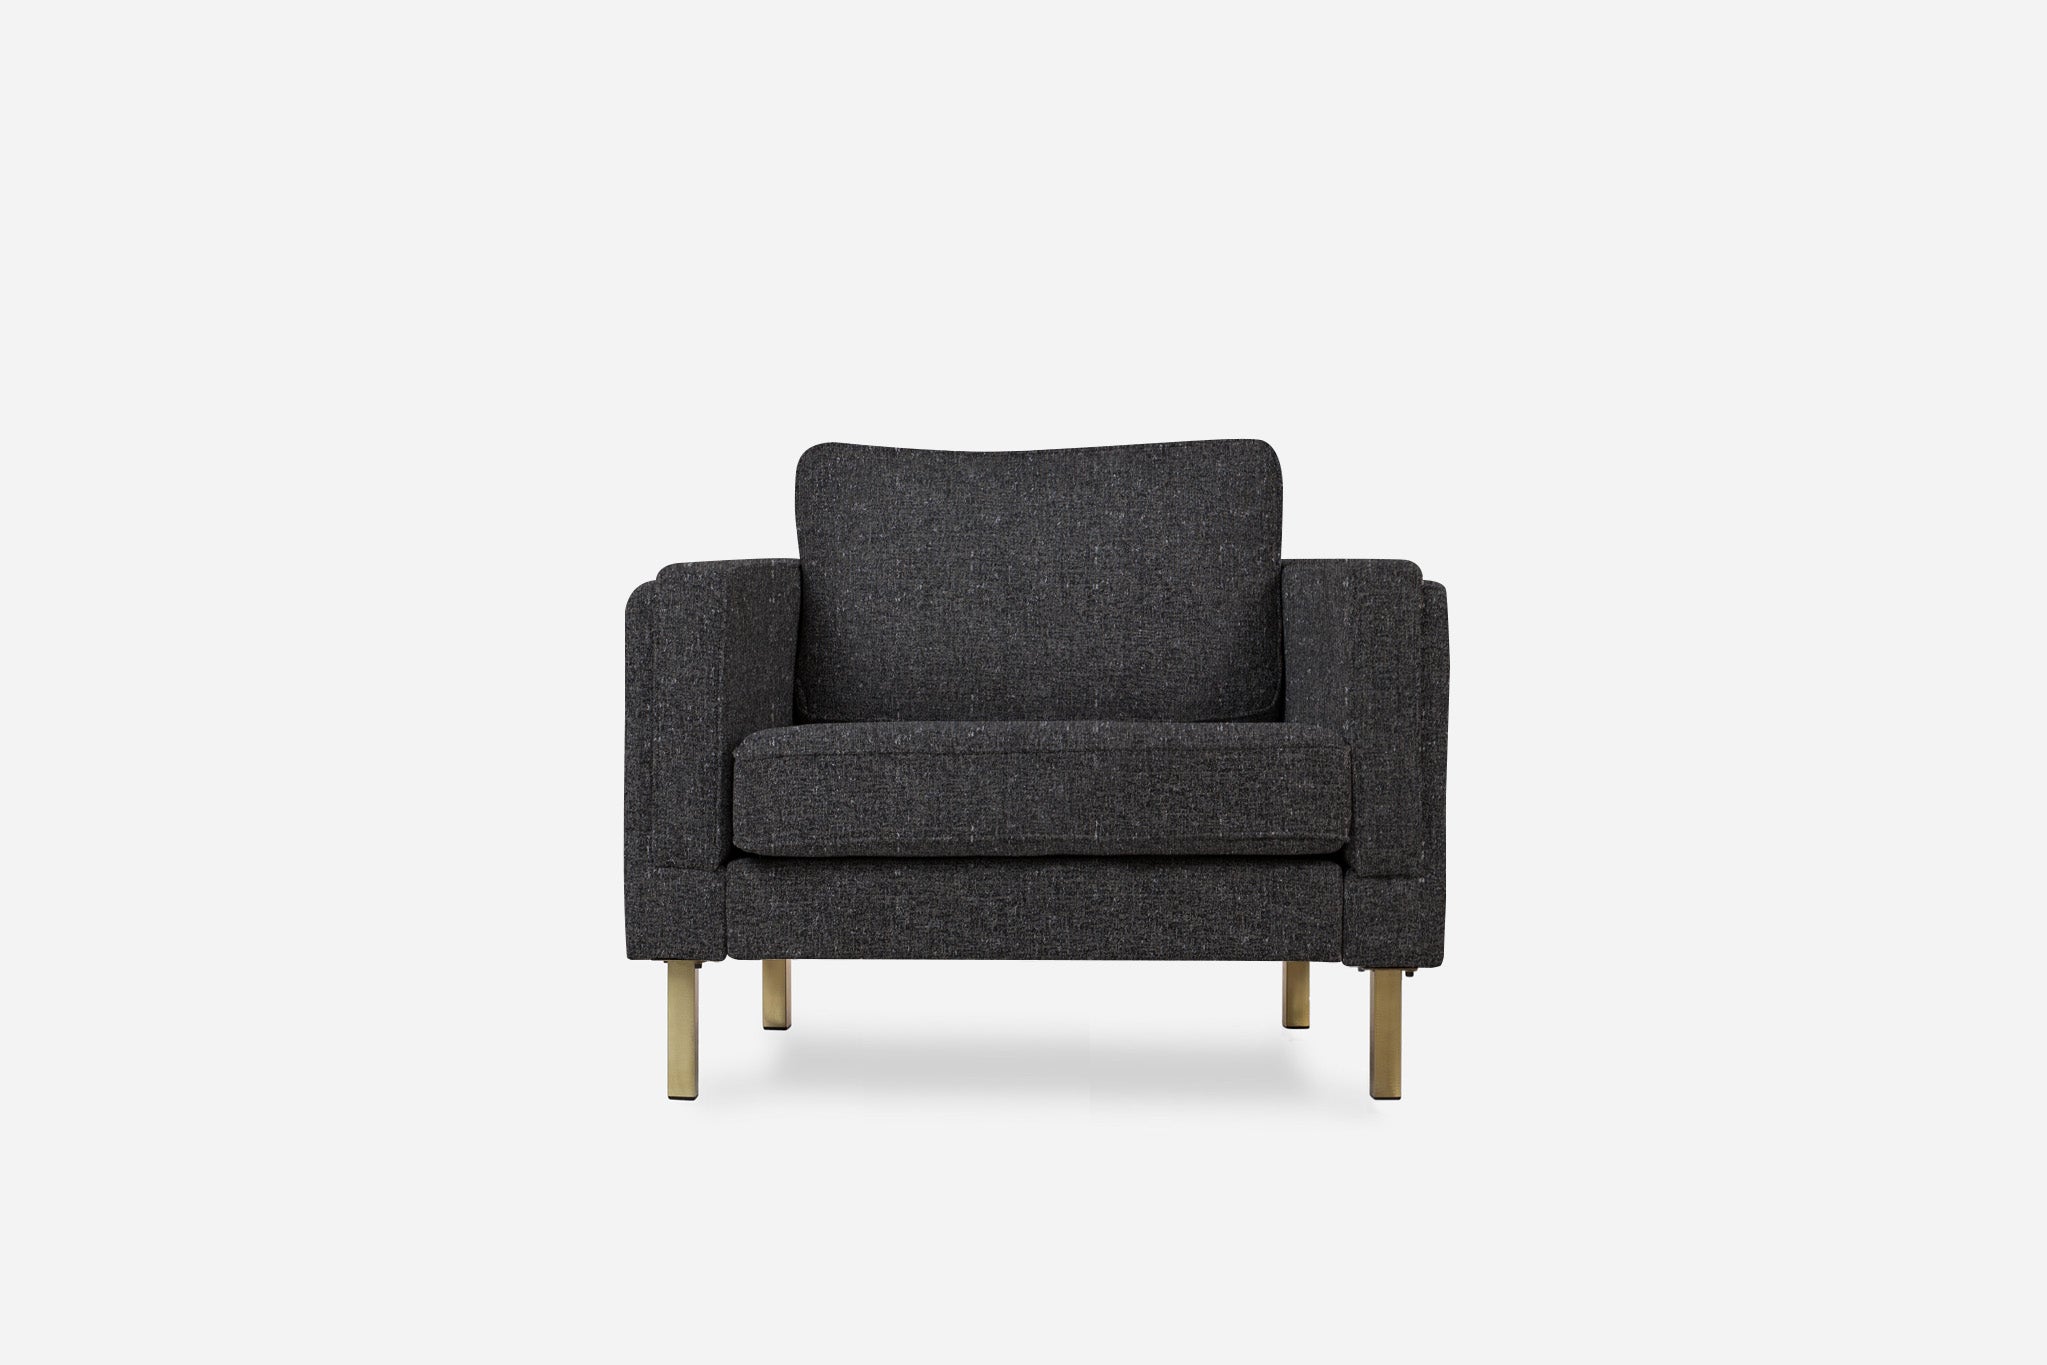 albany armchair shown in charcoal with gold legs